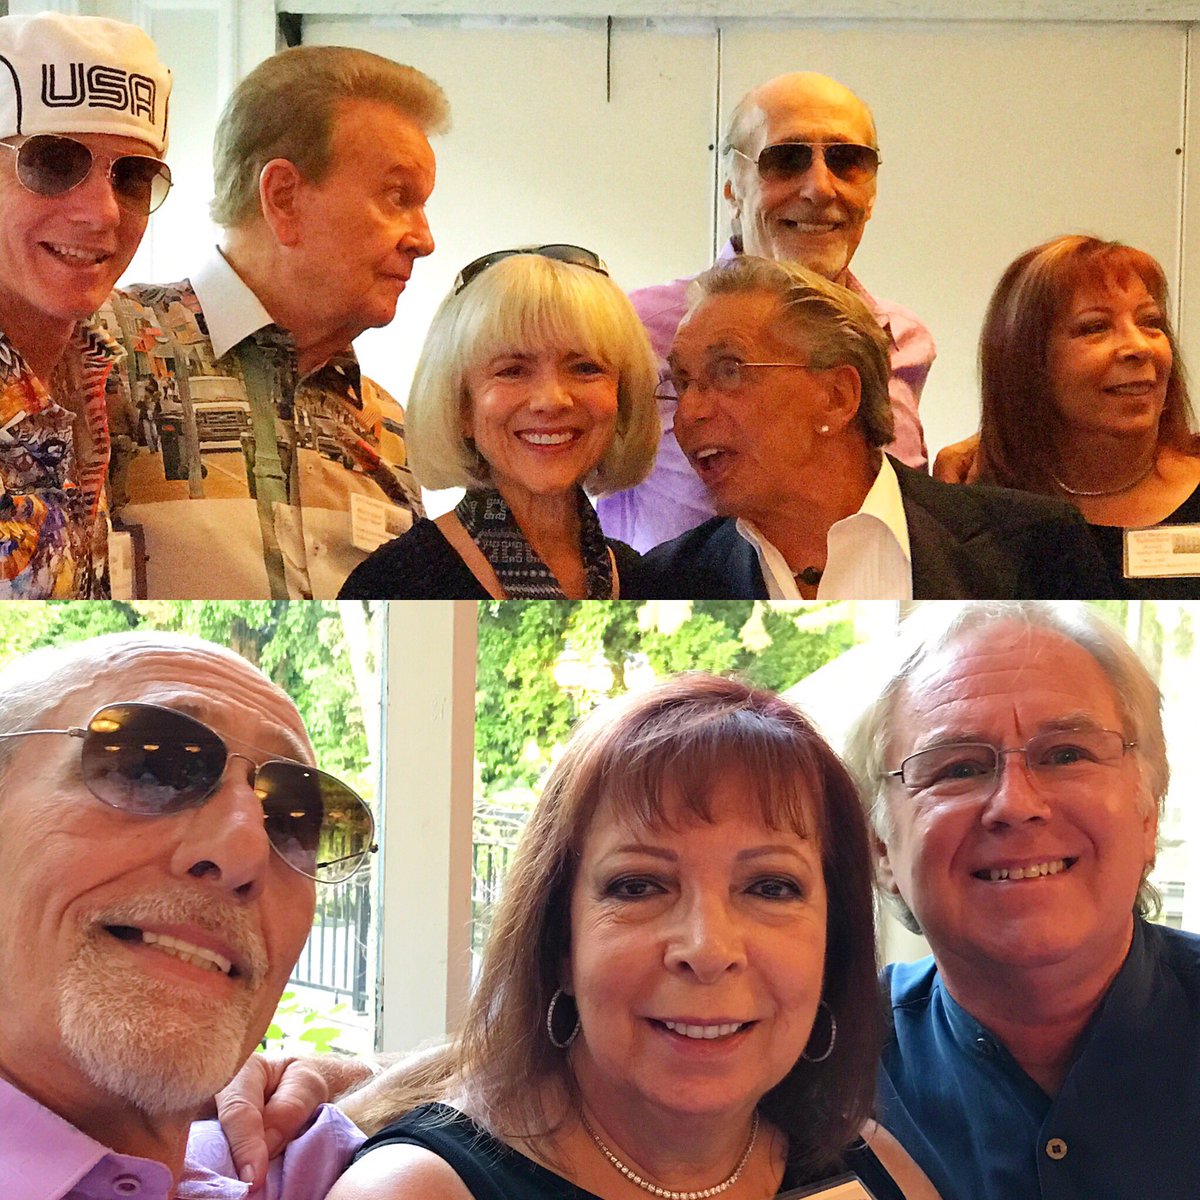 Last night I broke my perfect record for never going to a HS event and went to the Hollywood Professional School reunion. Great memories!